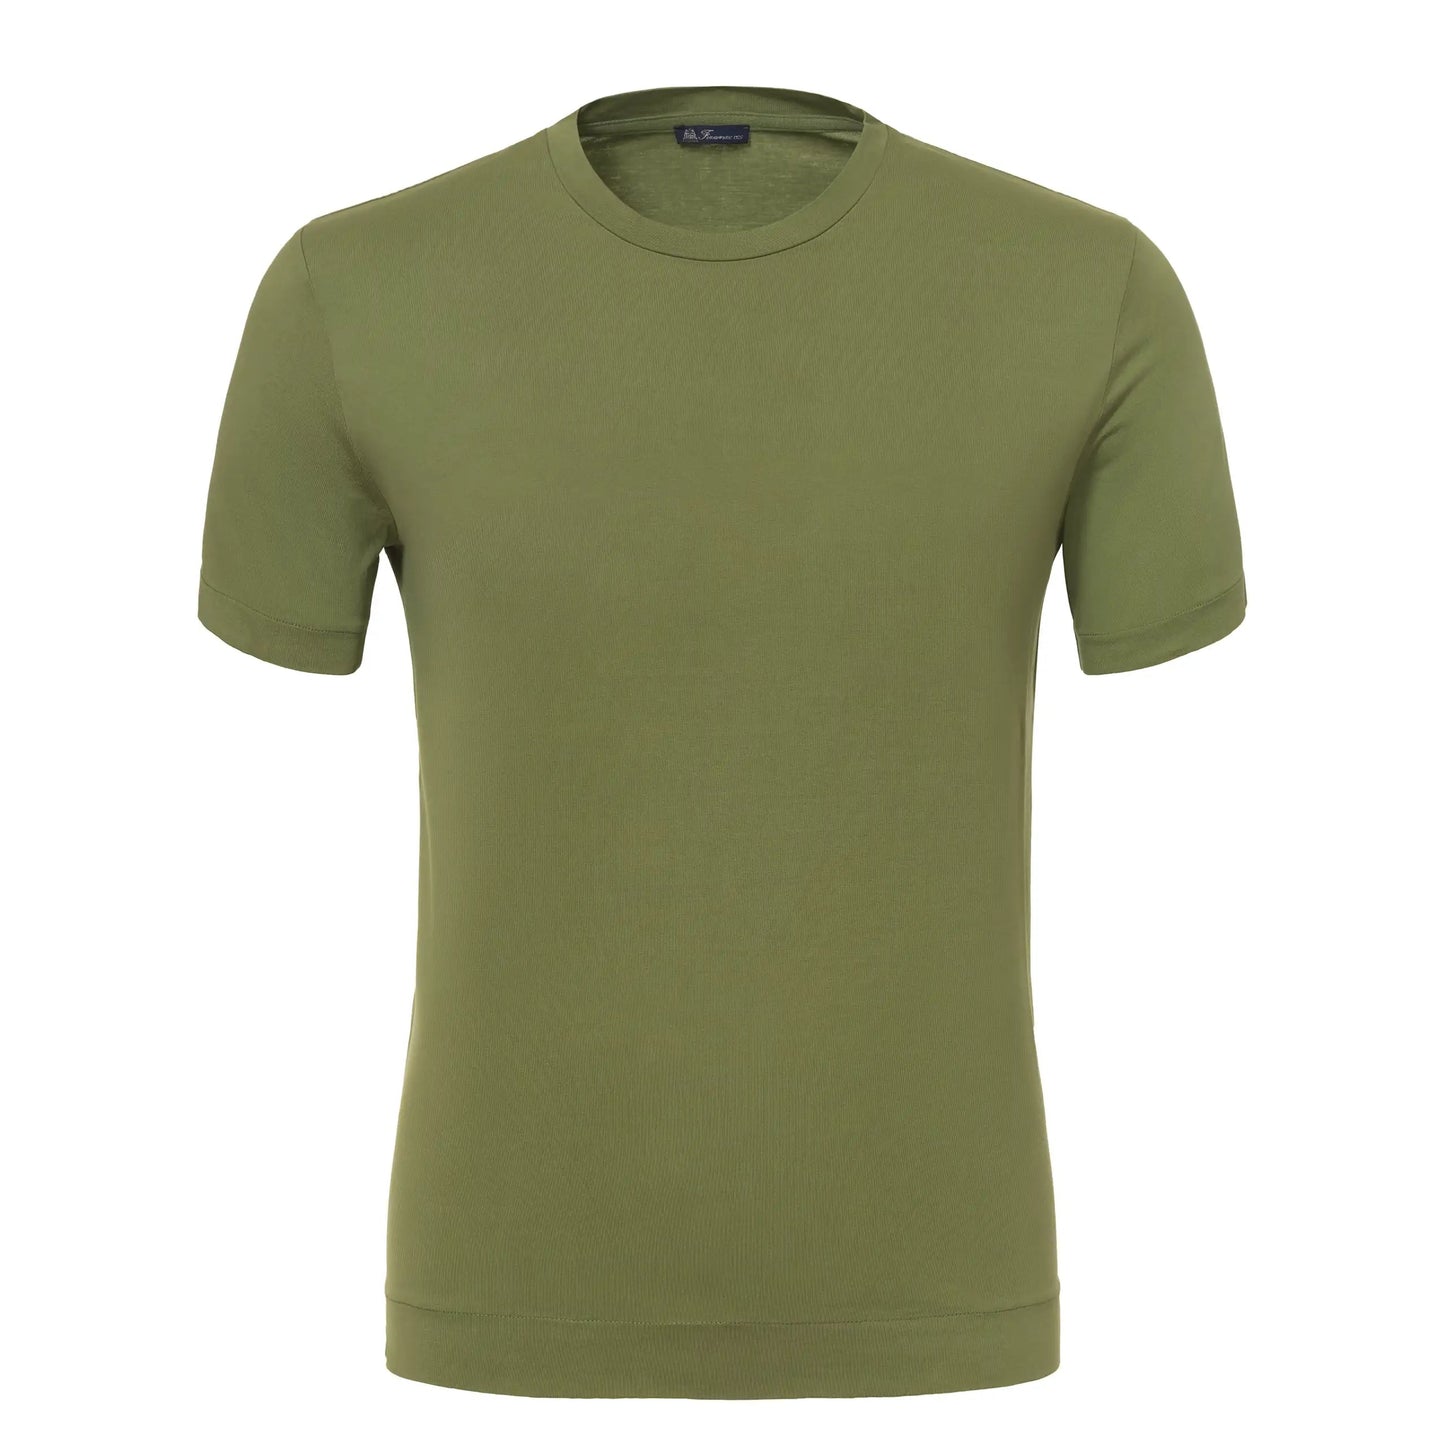 Finamore Cotton Crew-Neck T-Shirt in Forest Green - SARTALE